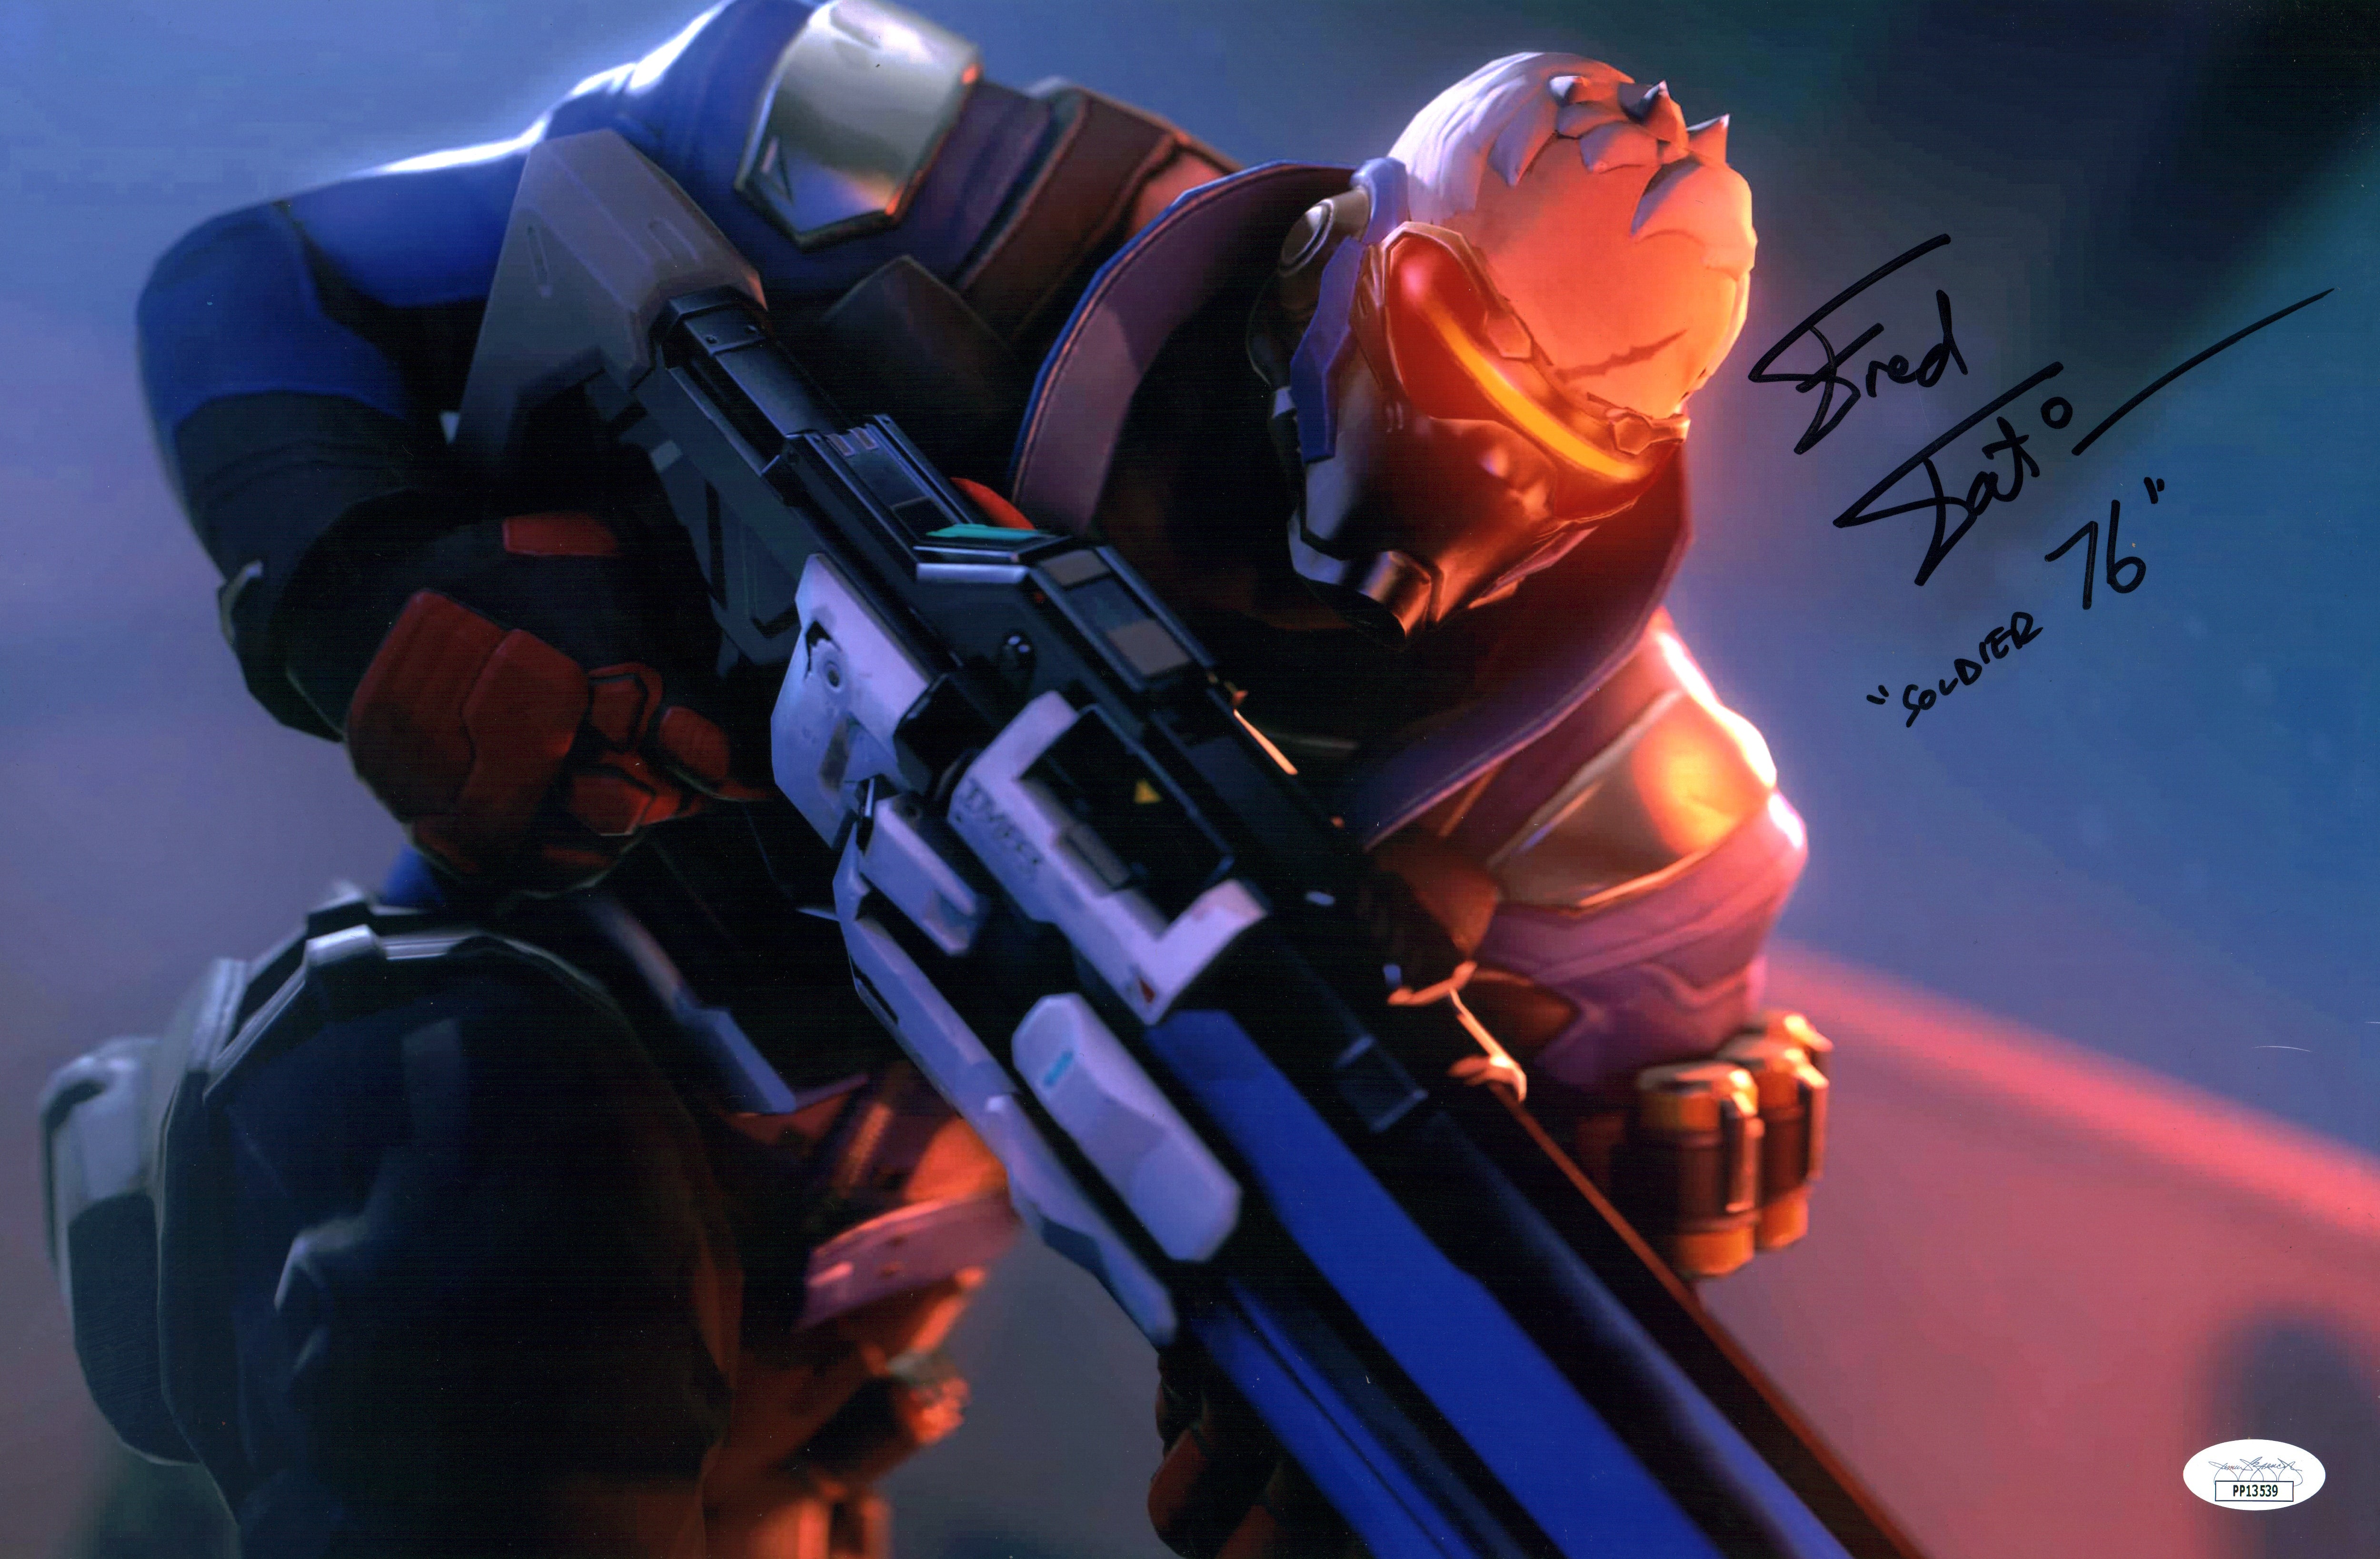 Fred Tatasciore Overwatch 11x17 Photo Poster Signed JSA Certified Autograph